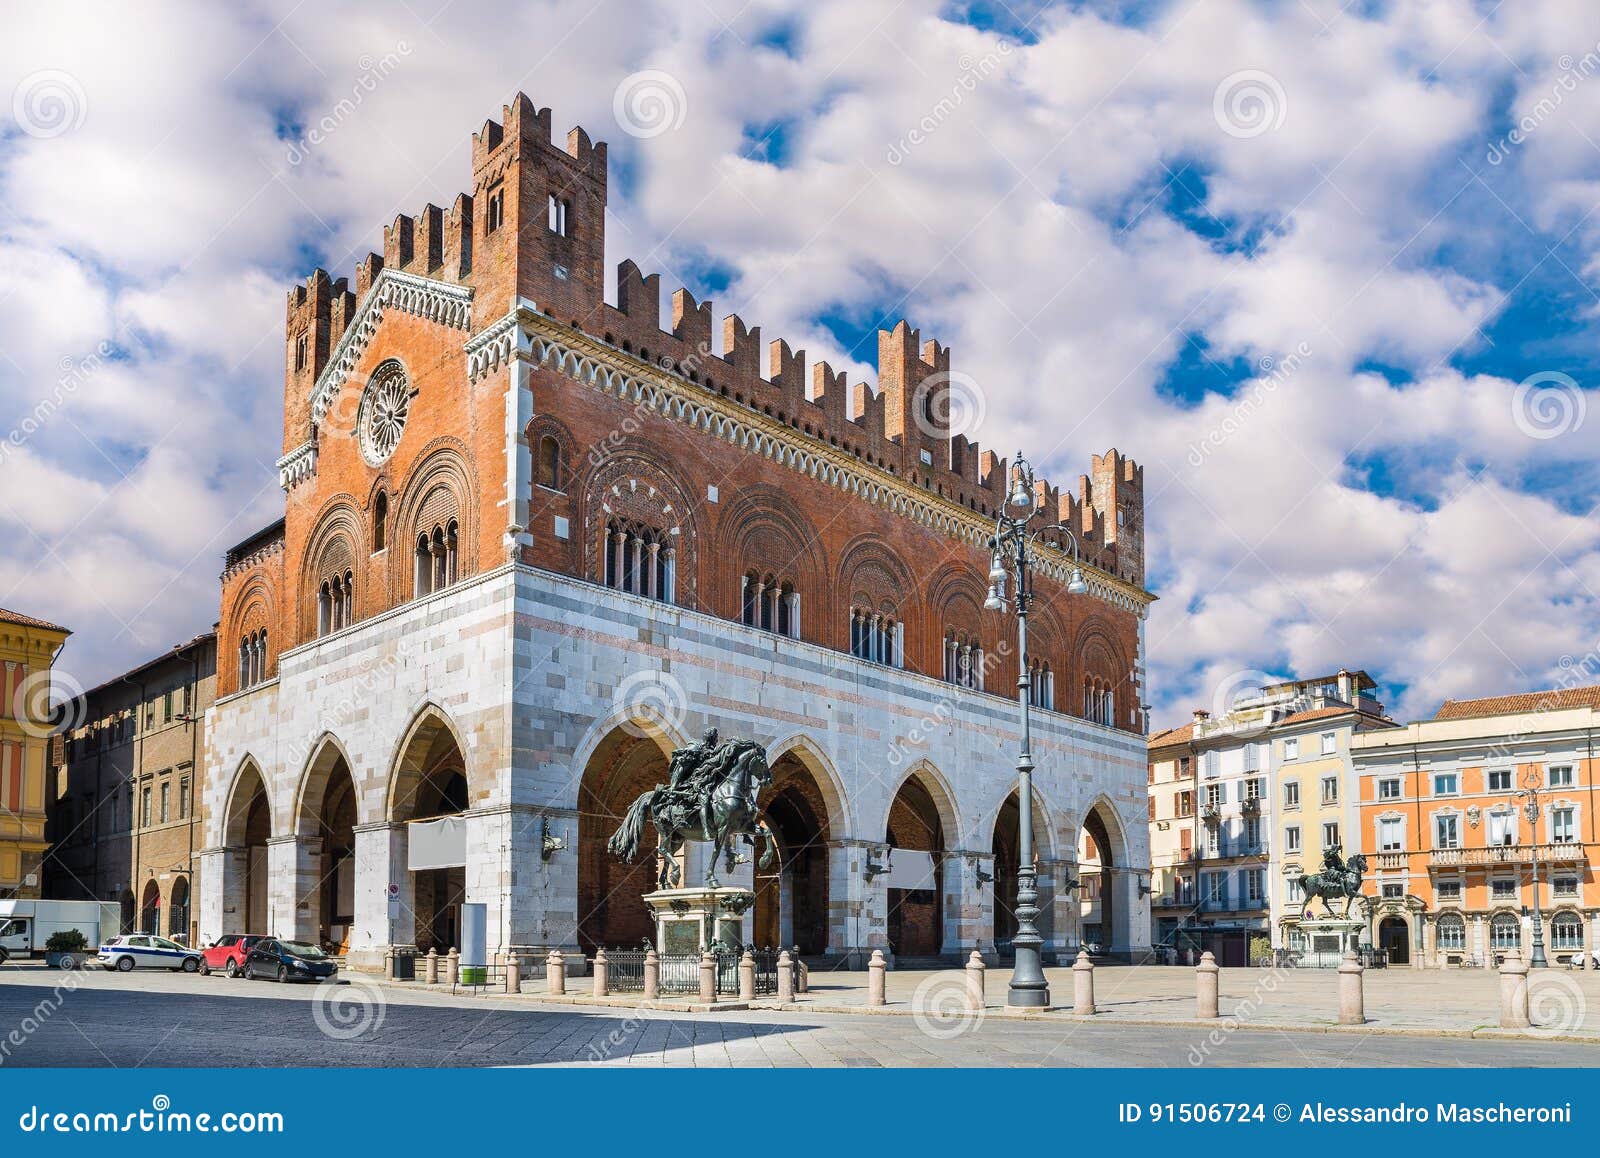 piacenza, italy. piazza cavalli, square horses, and palazzo gotico, gothic palace, in the city center